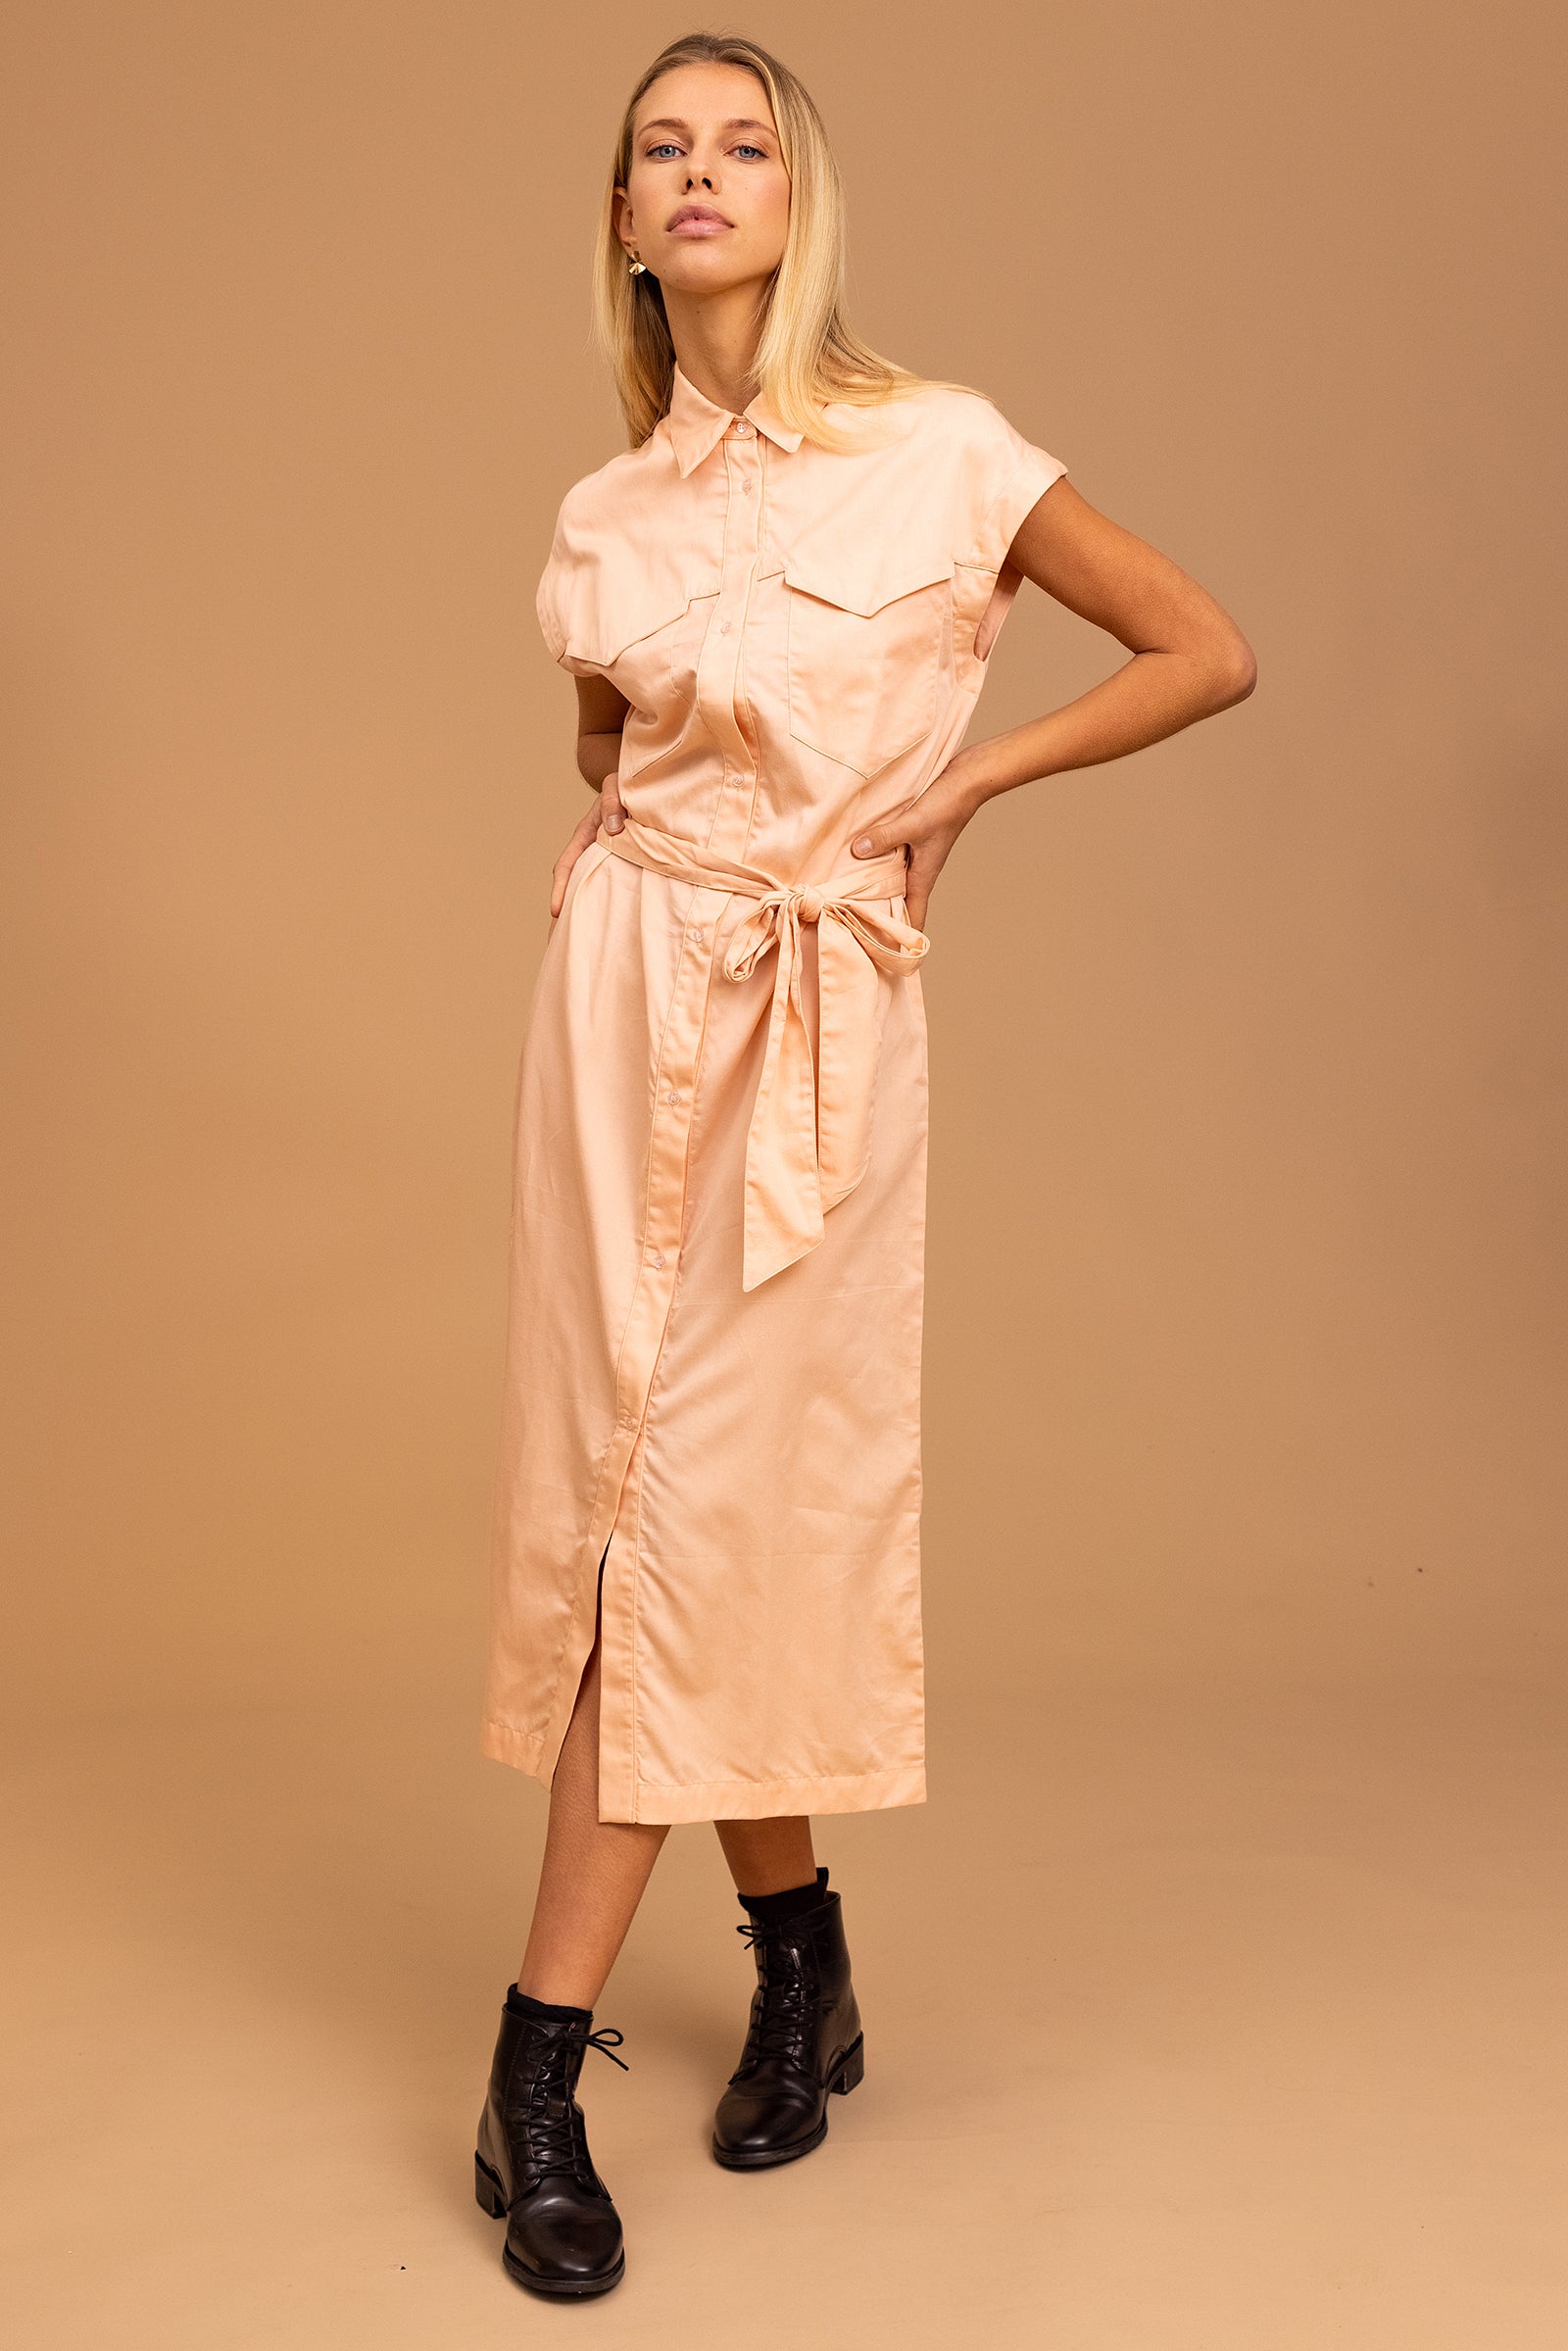 woman wearing Pale Pink Canaria Dress misericordia lima perou allure style elegance sobriety comfort cut classic collar